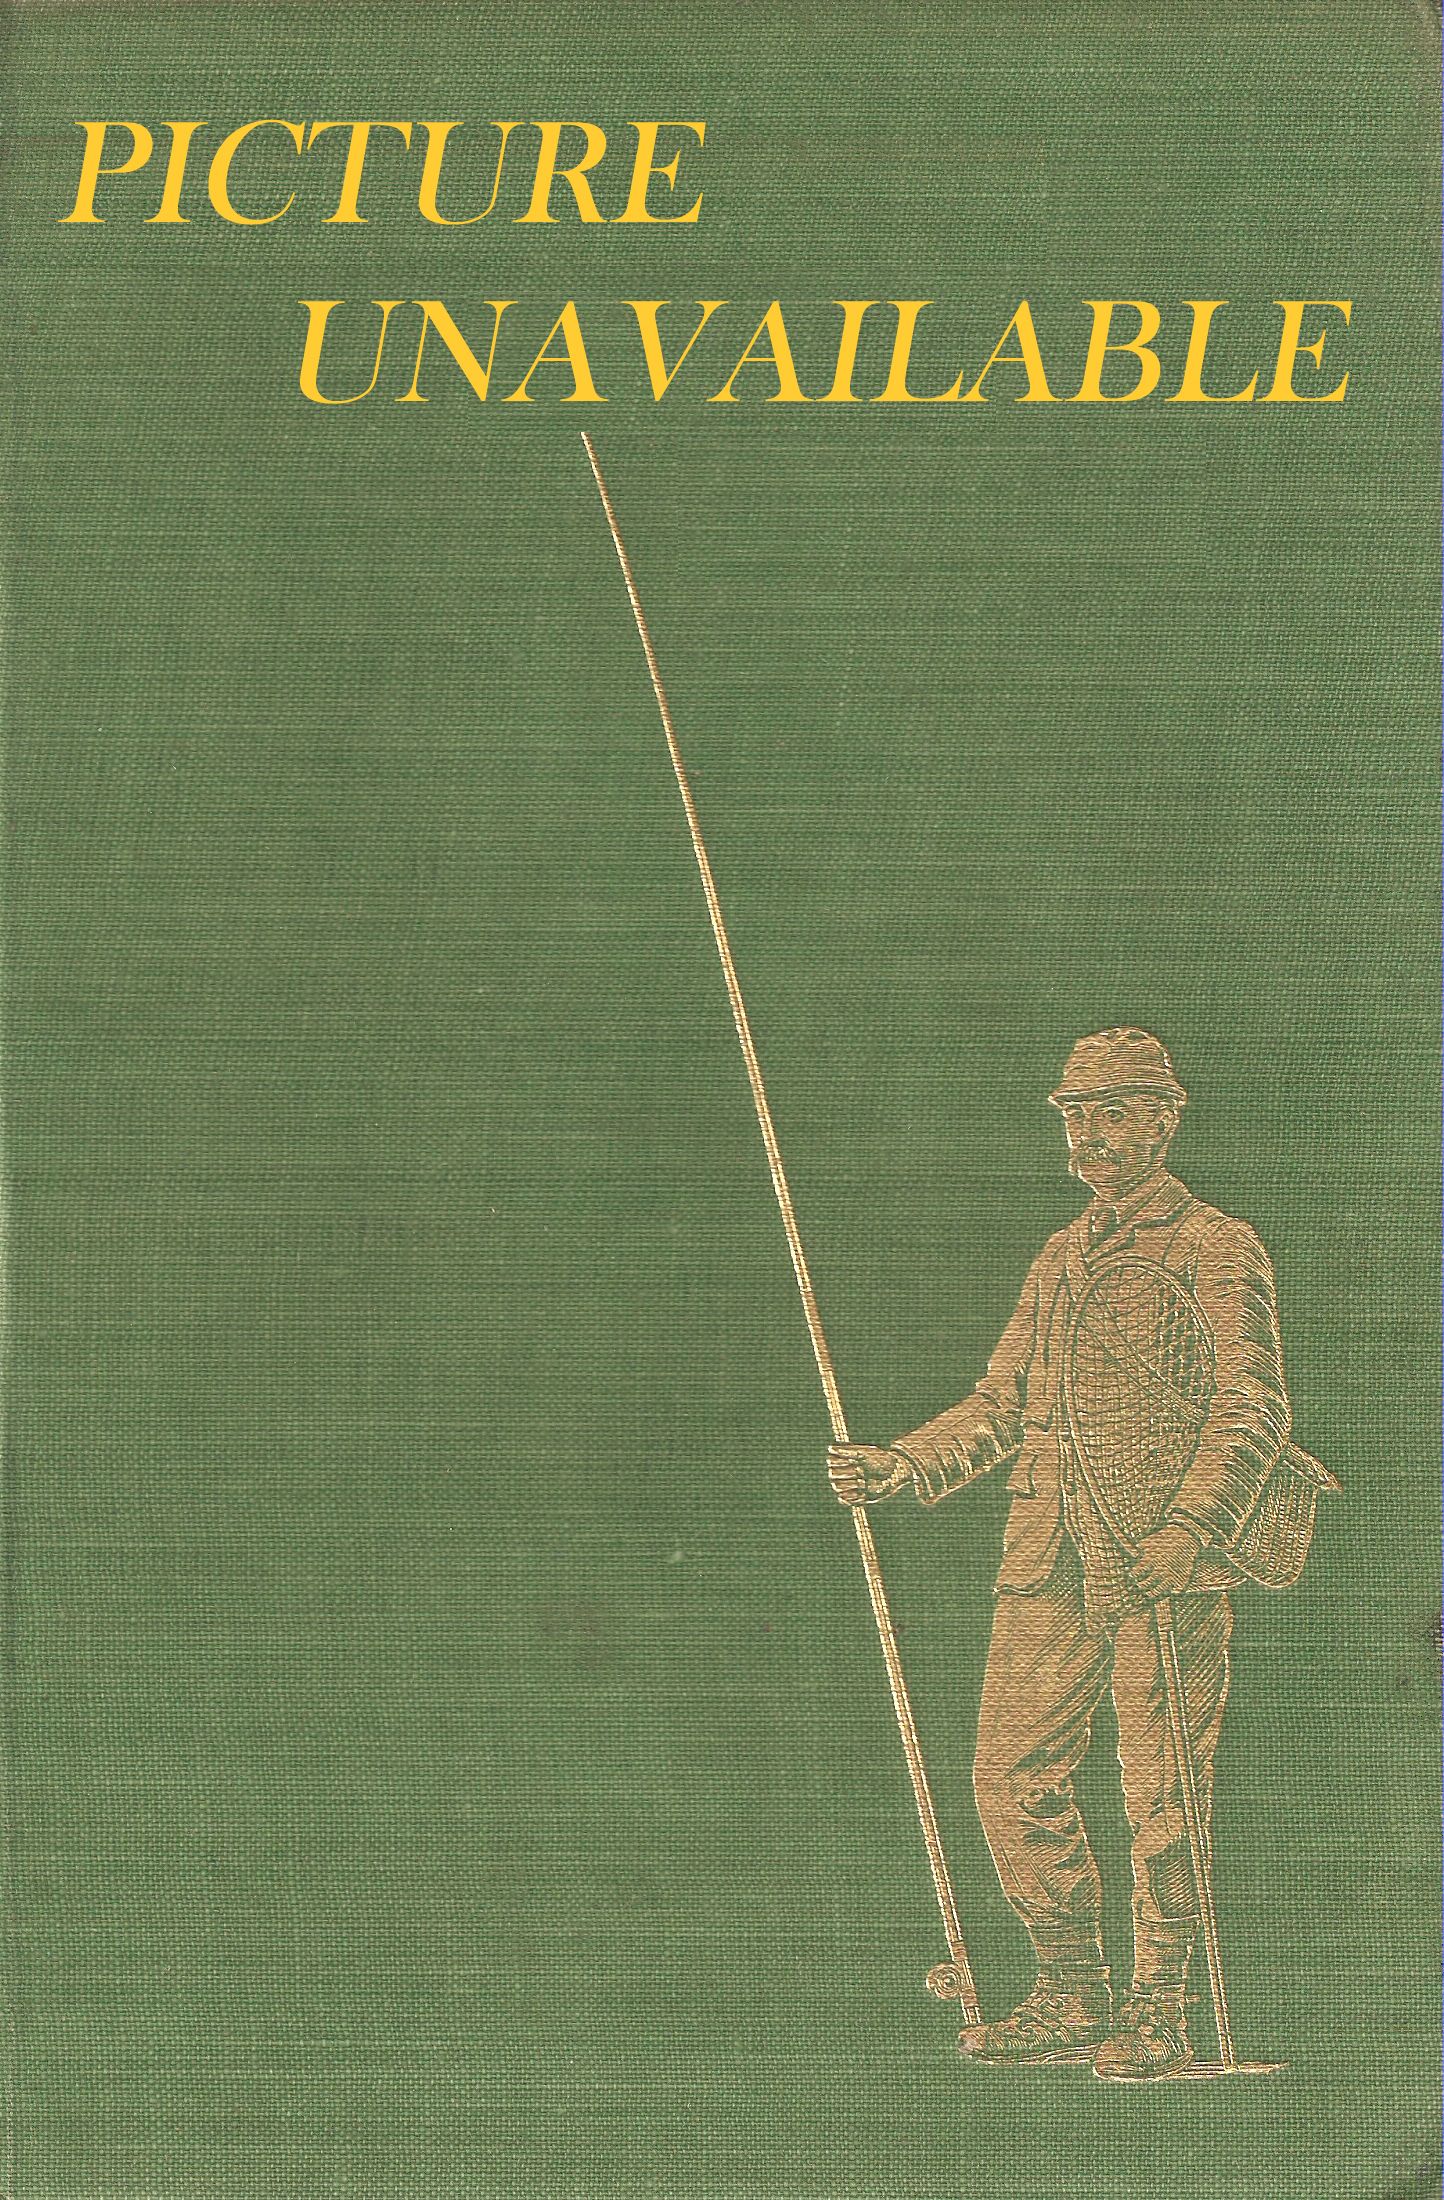 HARDY'S BOOK OF FISHING. Compiled by Patrick Annesley.